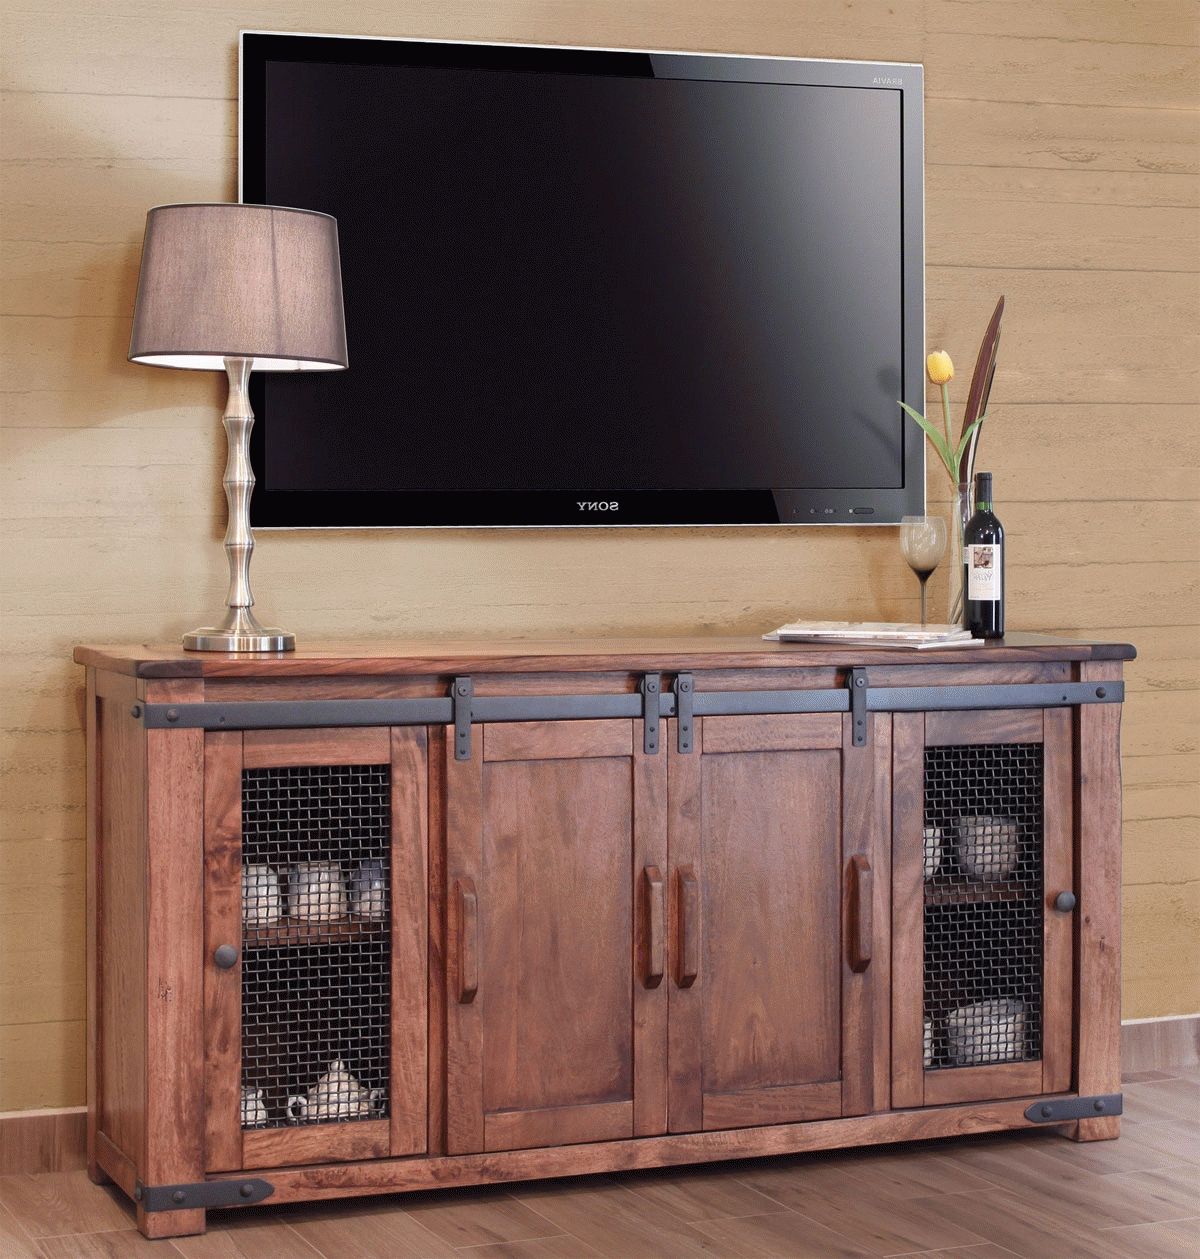 Rustic Tv Stand, Wood Tv Stand, Pine Tv Stand Pertaining To Pine Wood Tv Stands (View 7 of 15)